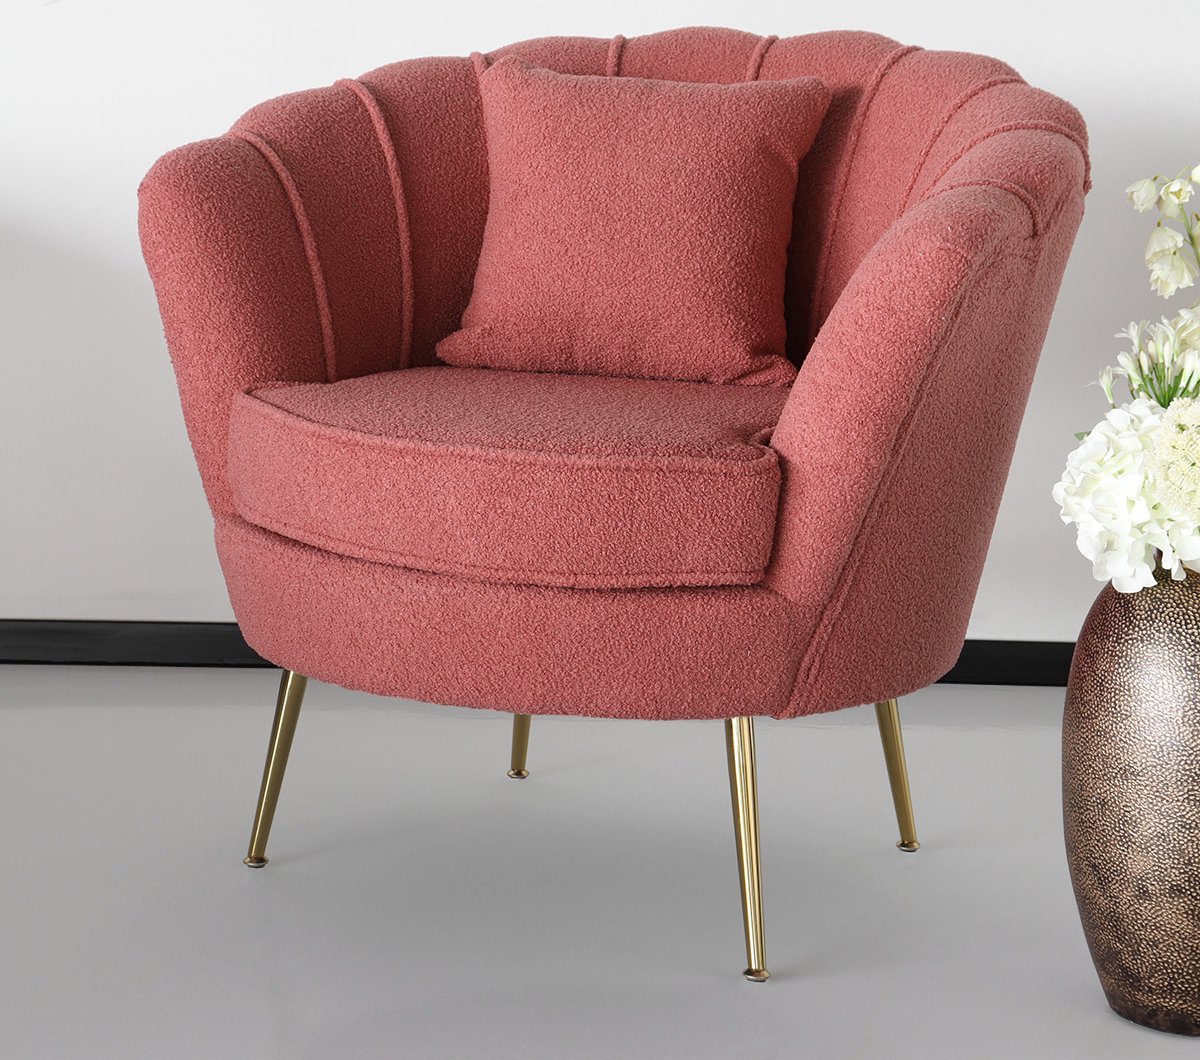 Lizzely Garden & Living Fauteuil Zitbank 1 Persoons Belle Teddy Oud Roze